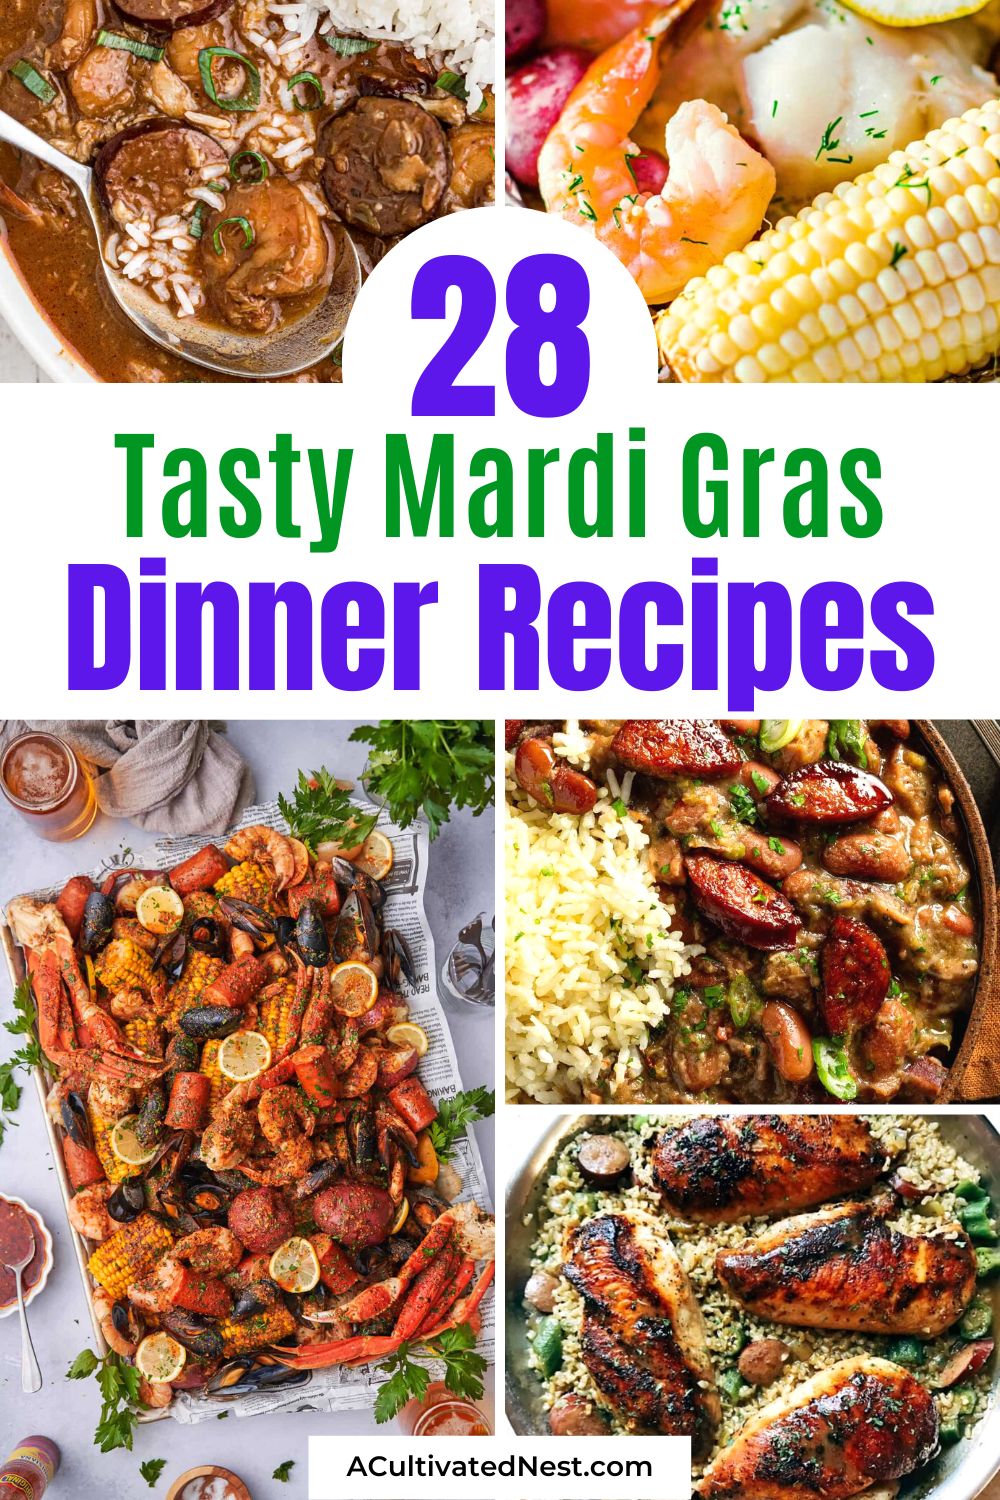 28 Tantalizing Mardi Gras Dinner Recipes- Celebrate Mardi Gras in culinary style with our curated selection of tantalizing Mardi Gras dinner recipes! From jambalaya to gumbo, experience the vibrant flavors of the season.| #MardiGrasRecipes #dinner #shrimp #dinnerIdeas #ACultivatedNest